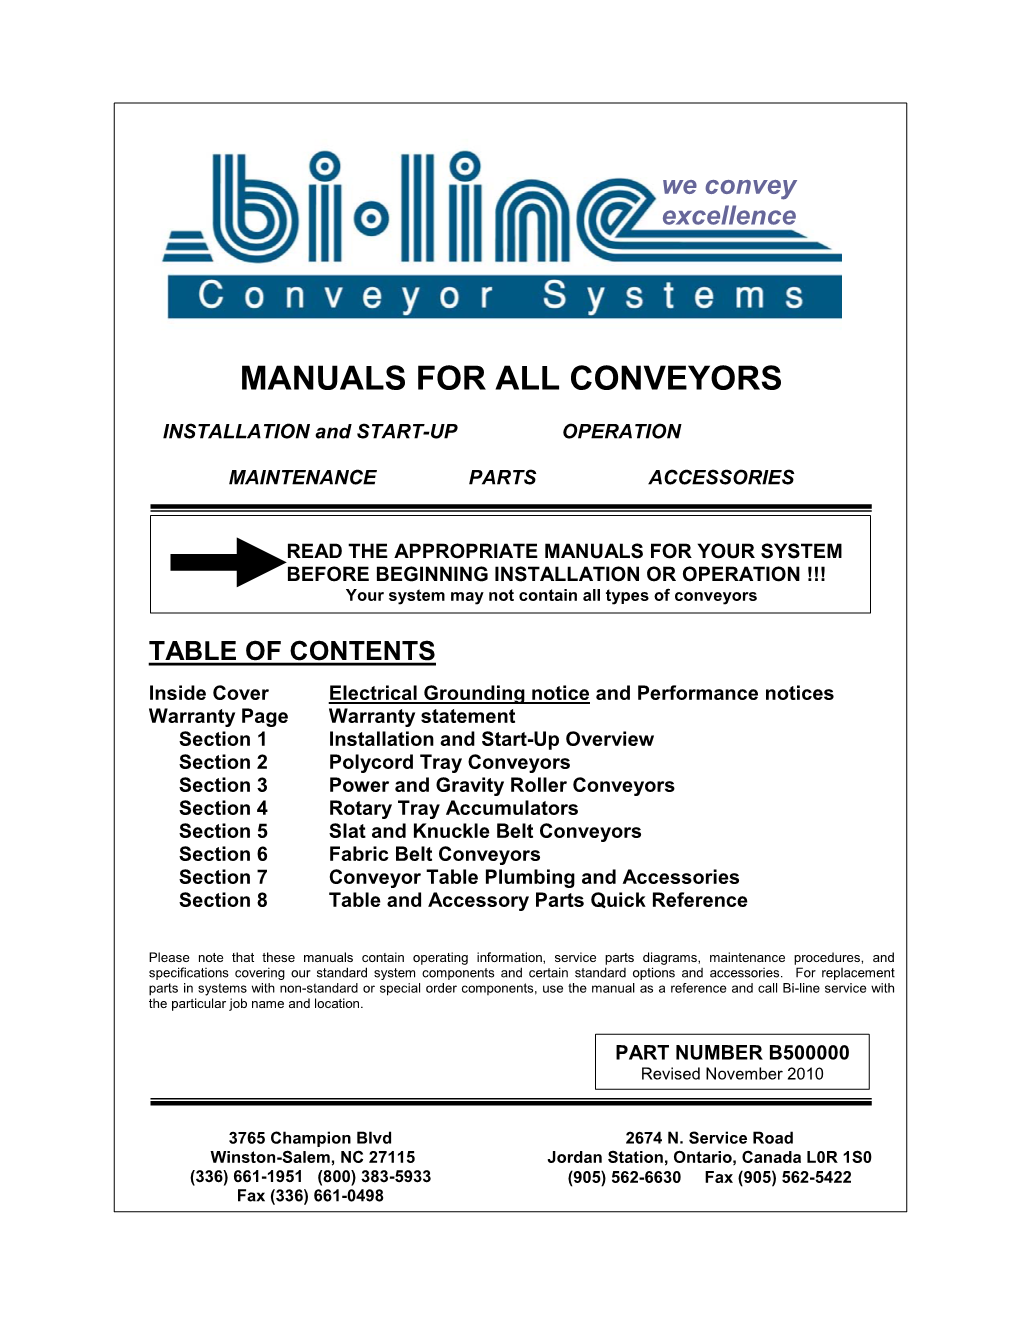 Manuals for All Conveyors